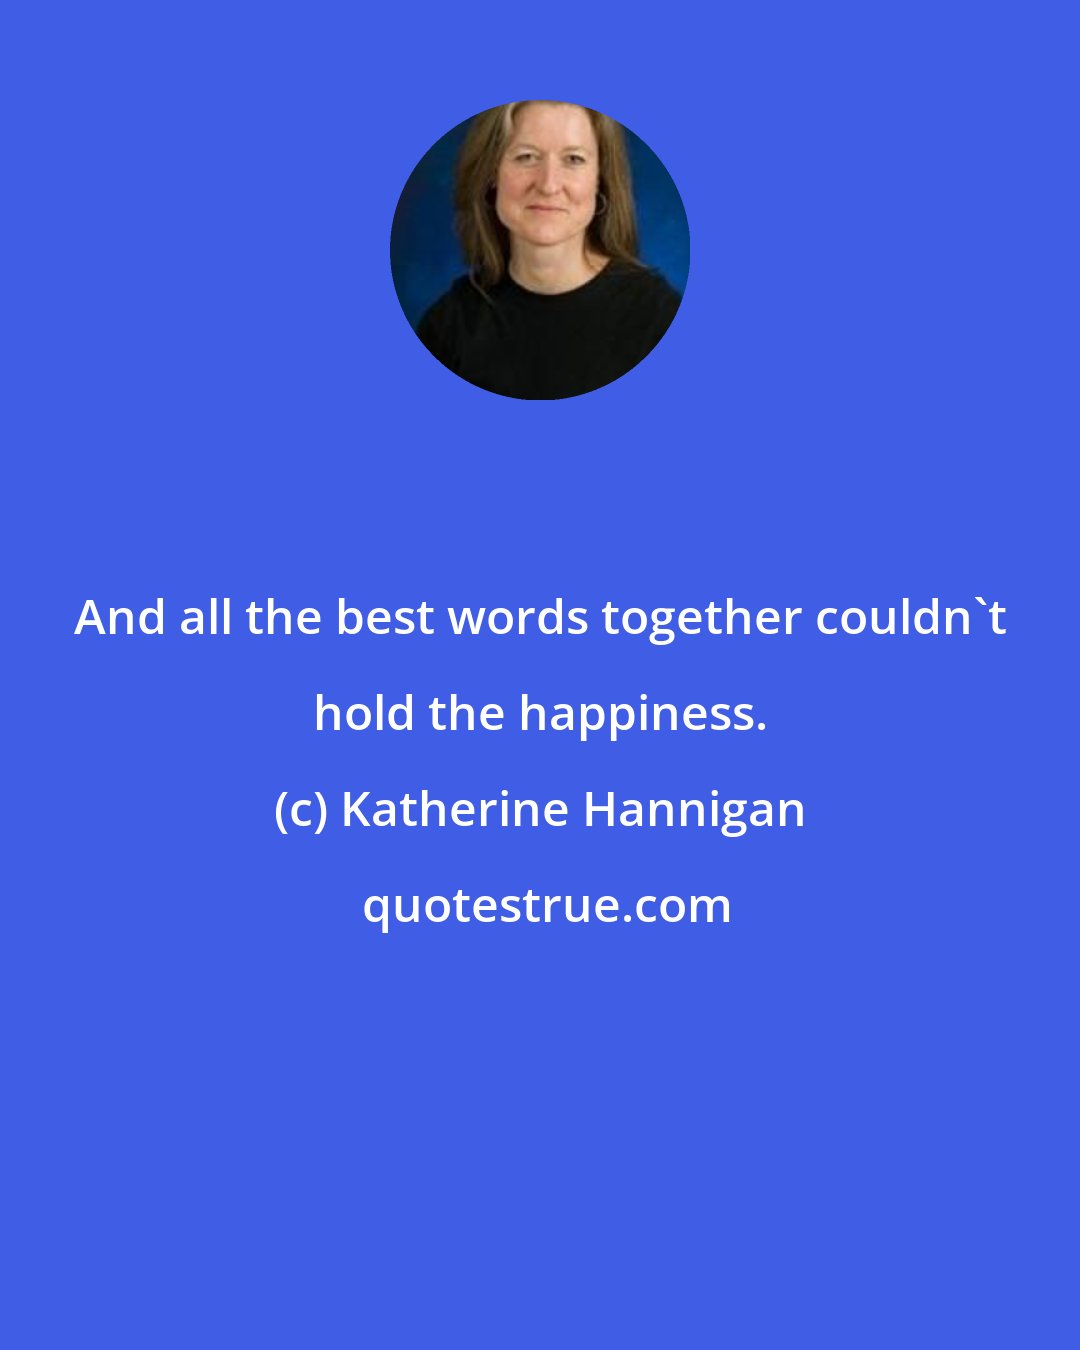 Katherine Hannigan: And all the best words together couldn't hold the happiness.